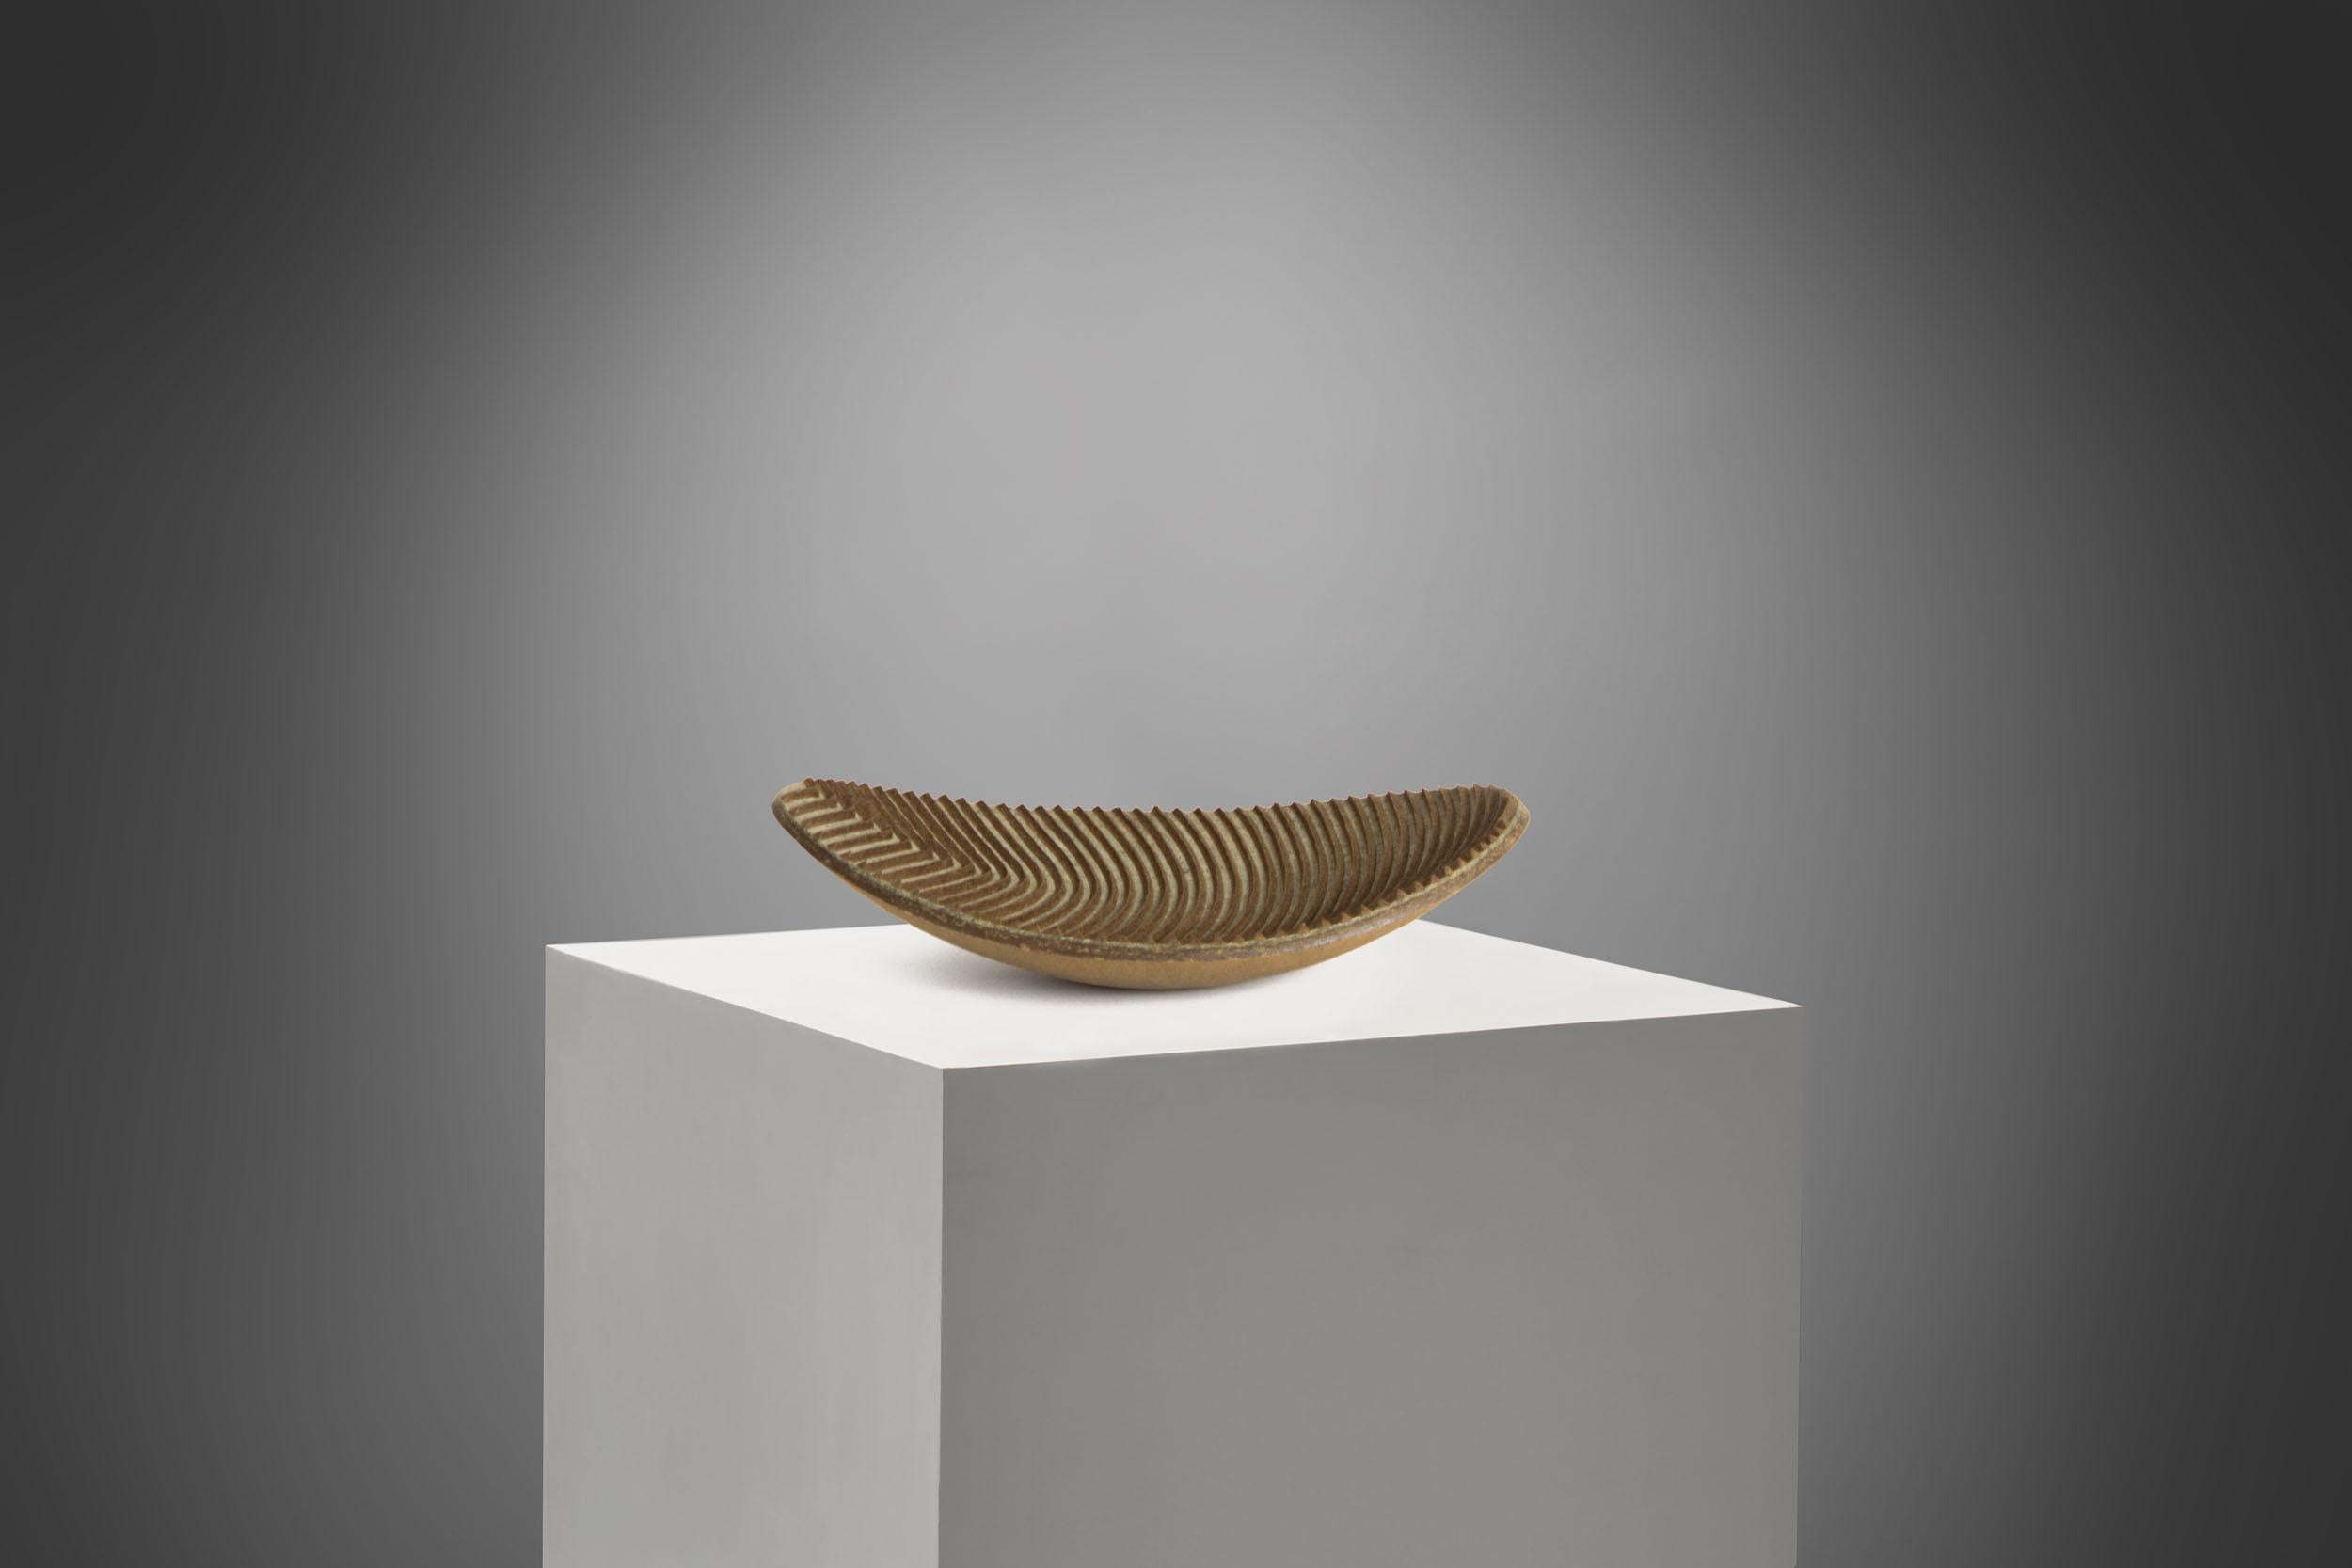 Organic bowl by contemporary artist Domingos Tótora. Made of recycled cardboard.

Domingos Tótora creates objects and sculptures where beauty is inseparable from function, lifting common everyday objects and injecting them with the spirit of Minas